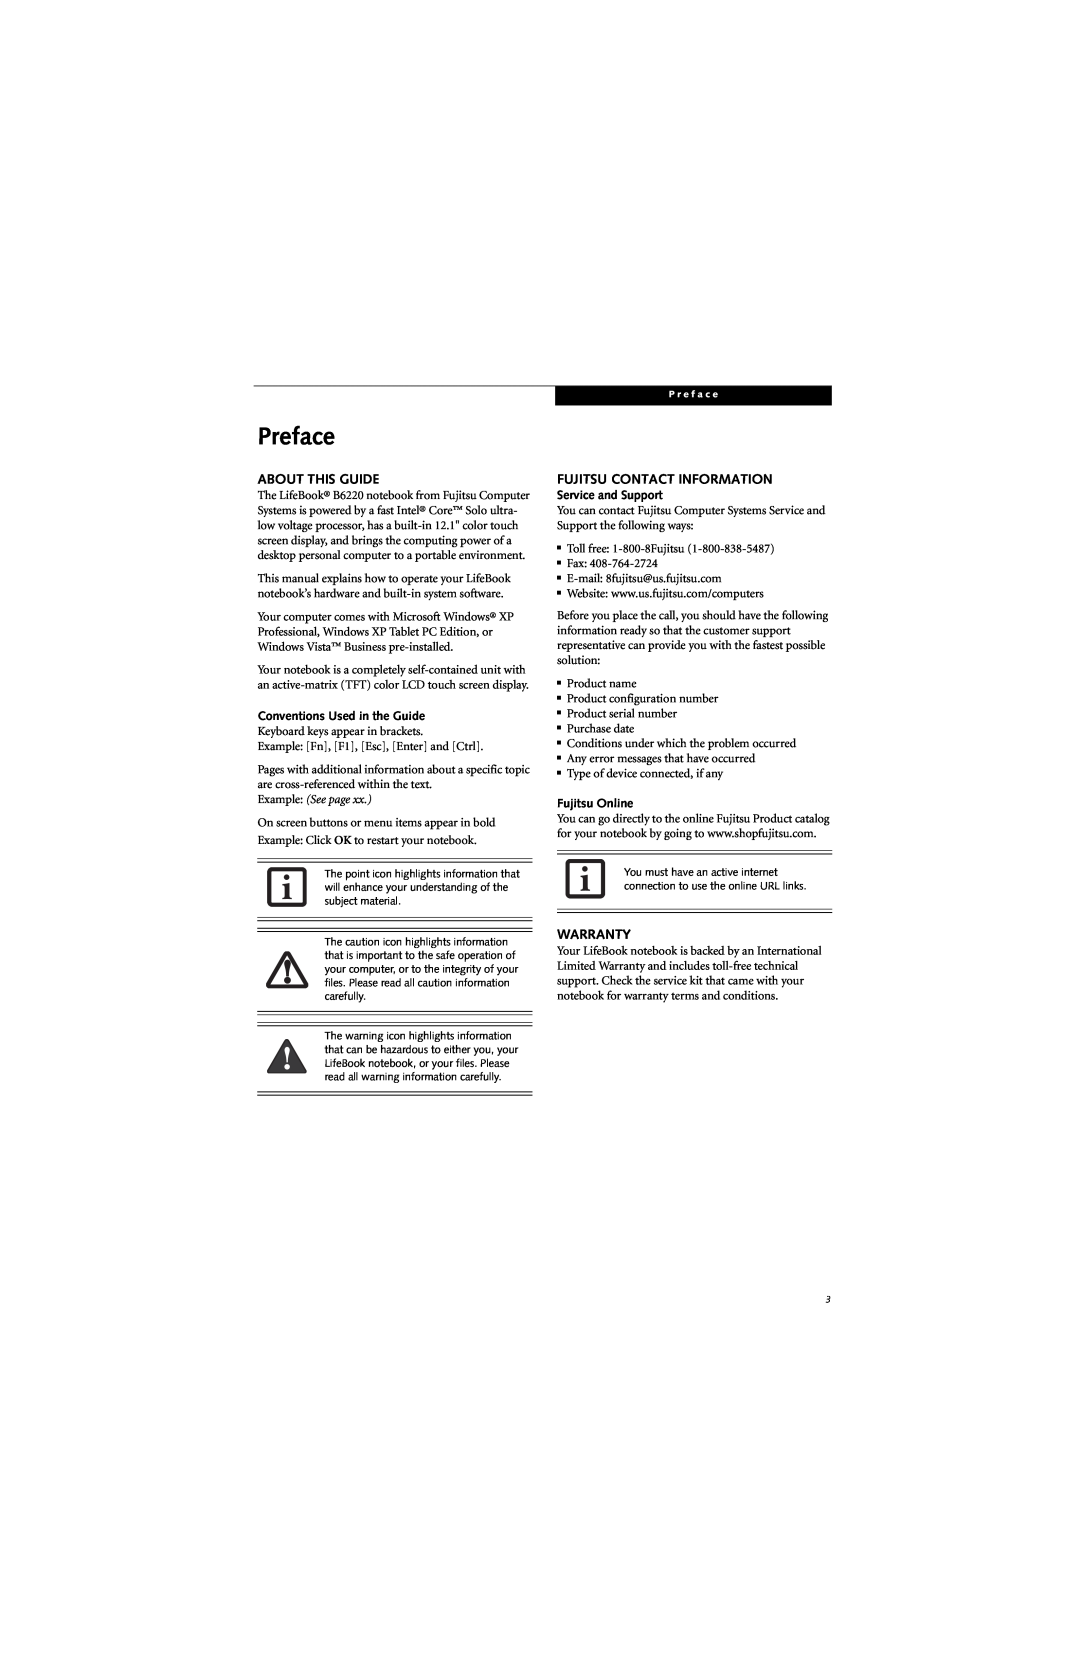 Fujitsu B6220 manual Preface, About This Guide, Fujitsu Contact Information, Warranty, Conventions Used in the Guide 